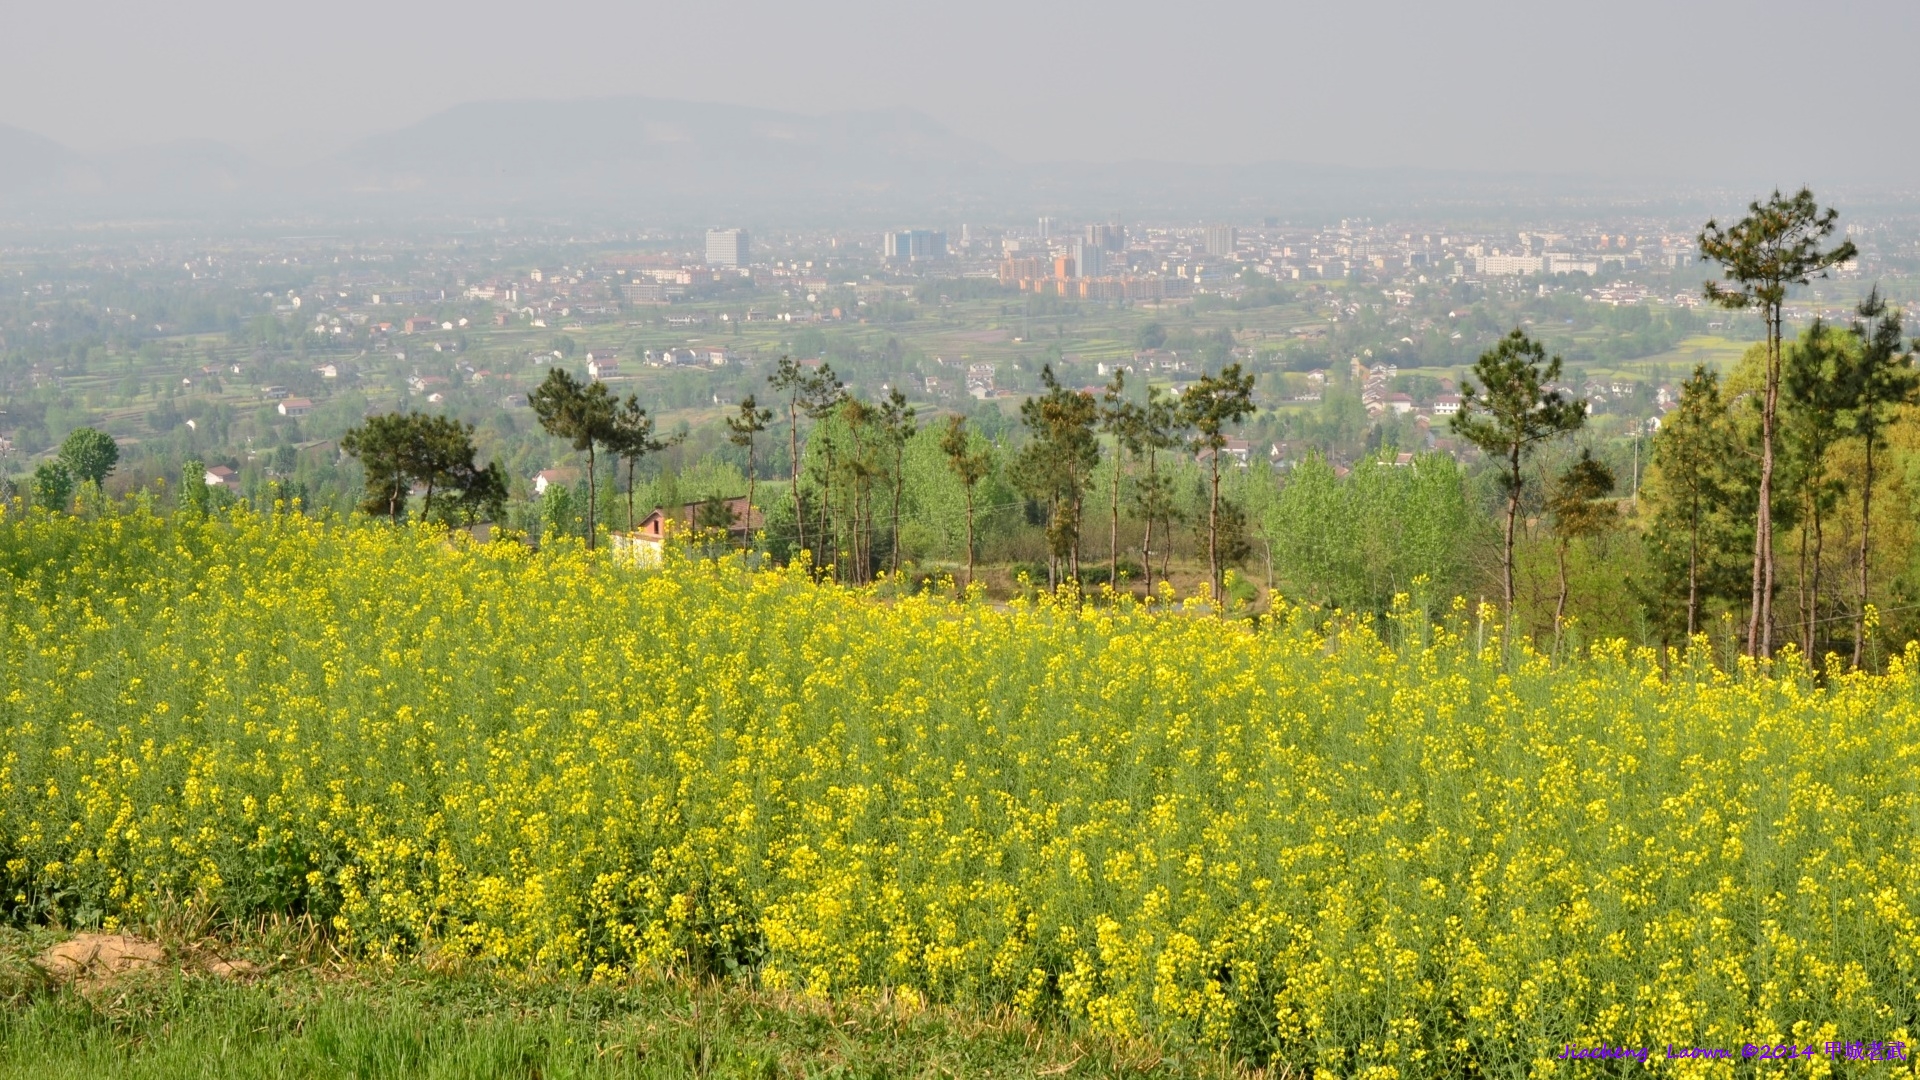 Overlook the town of Nanzhen from mid-Han Mount